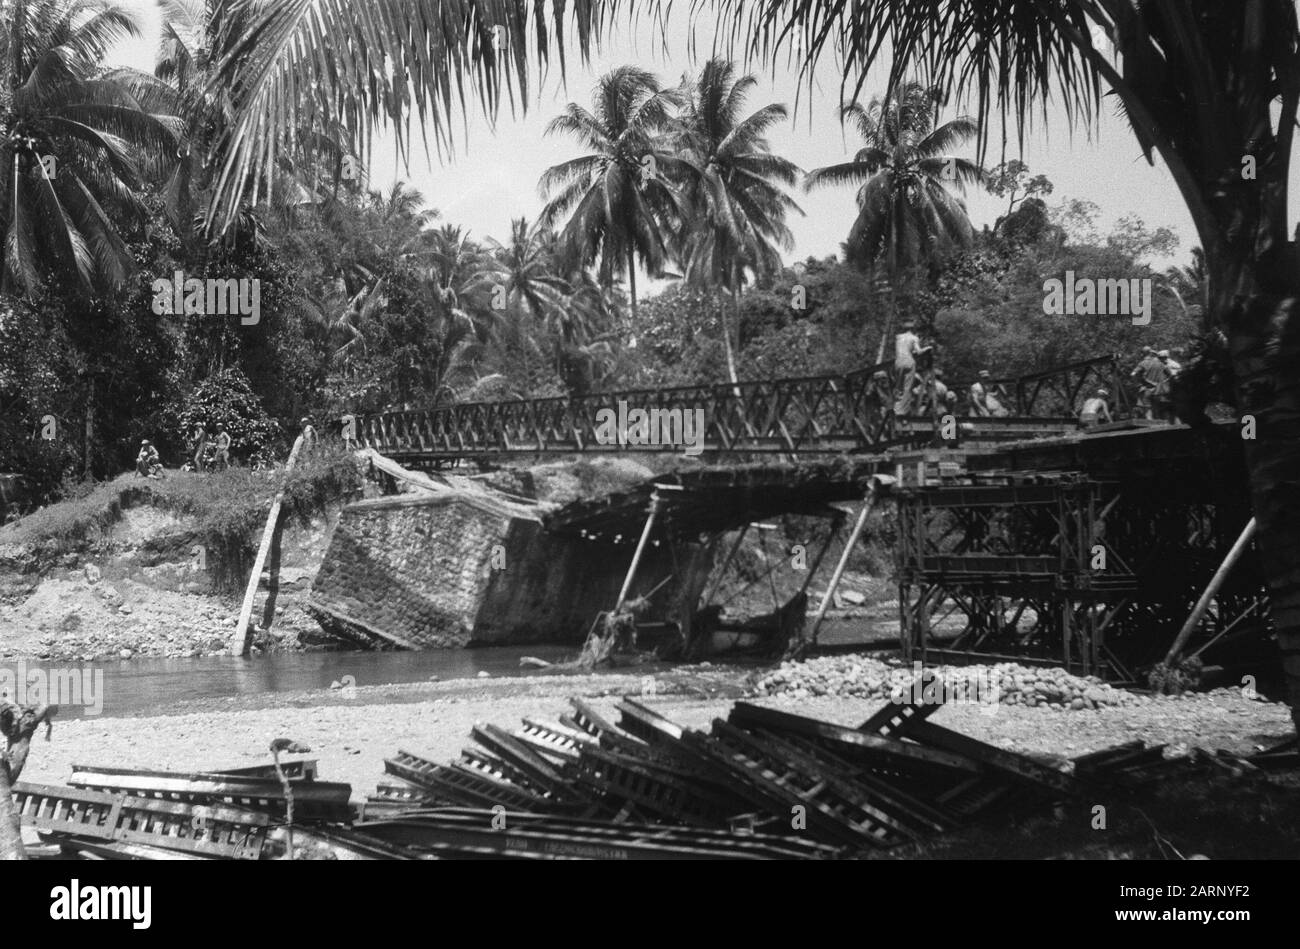 Proceeding to Fort van der Capellen and Fort de Kock (Anei Gorge)  [destroyed bridge with a newly constructed Bailey bridge] Date: 29 December 1948 Location: Indonesia, Dutch East Indies, Sumatra Stock Photo